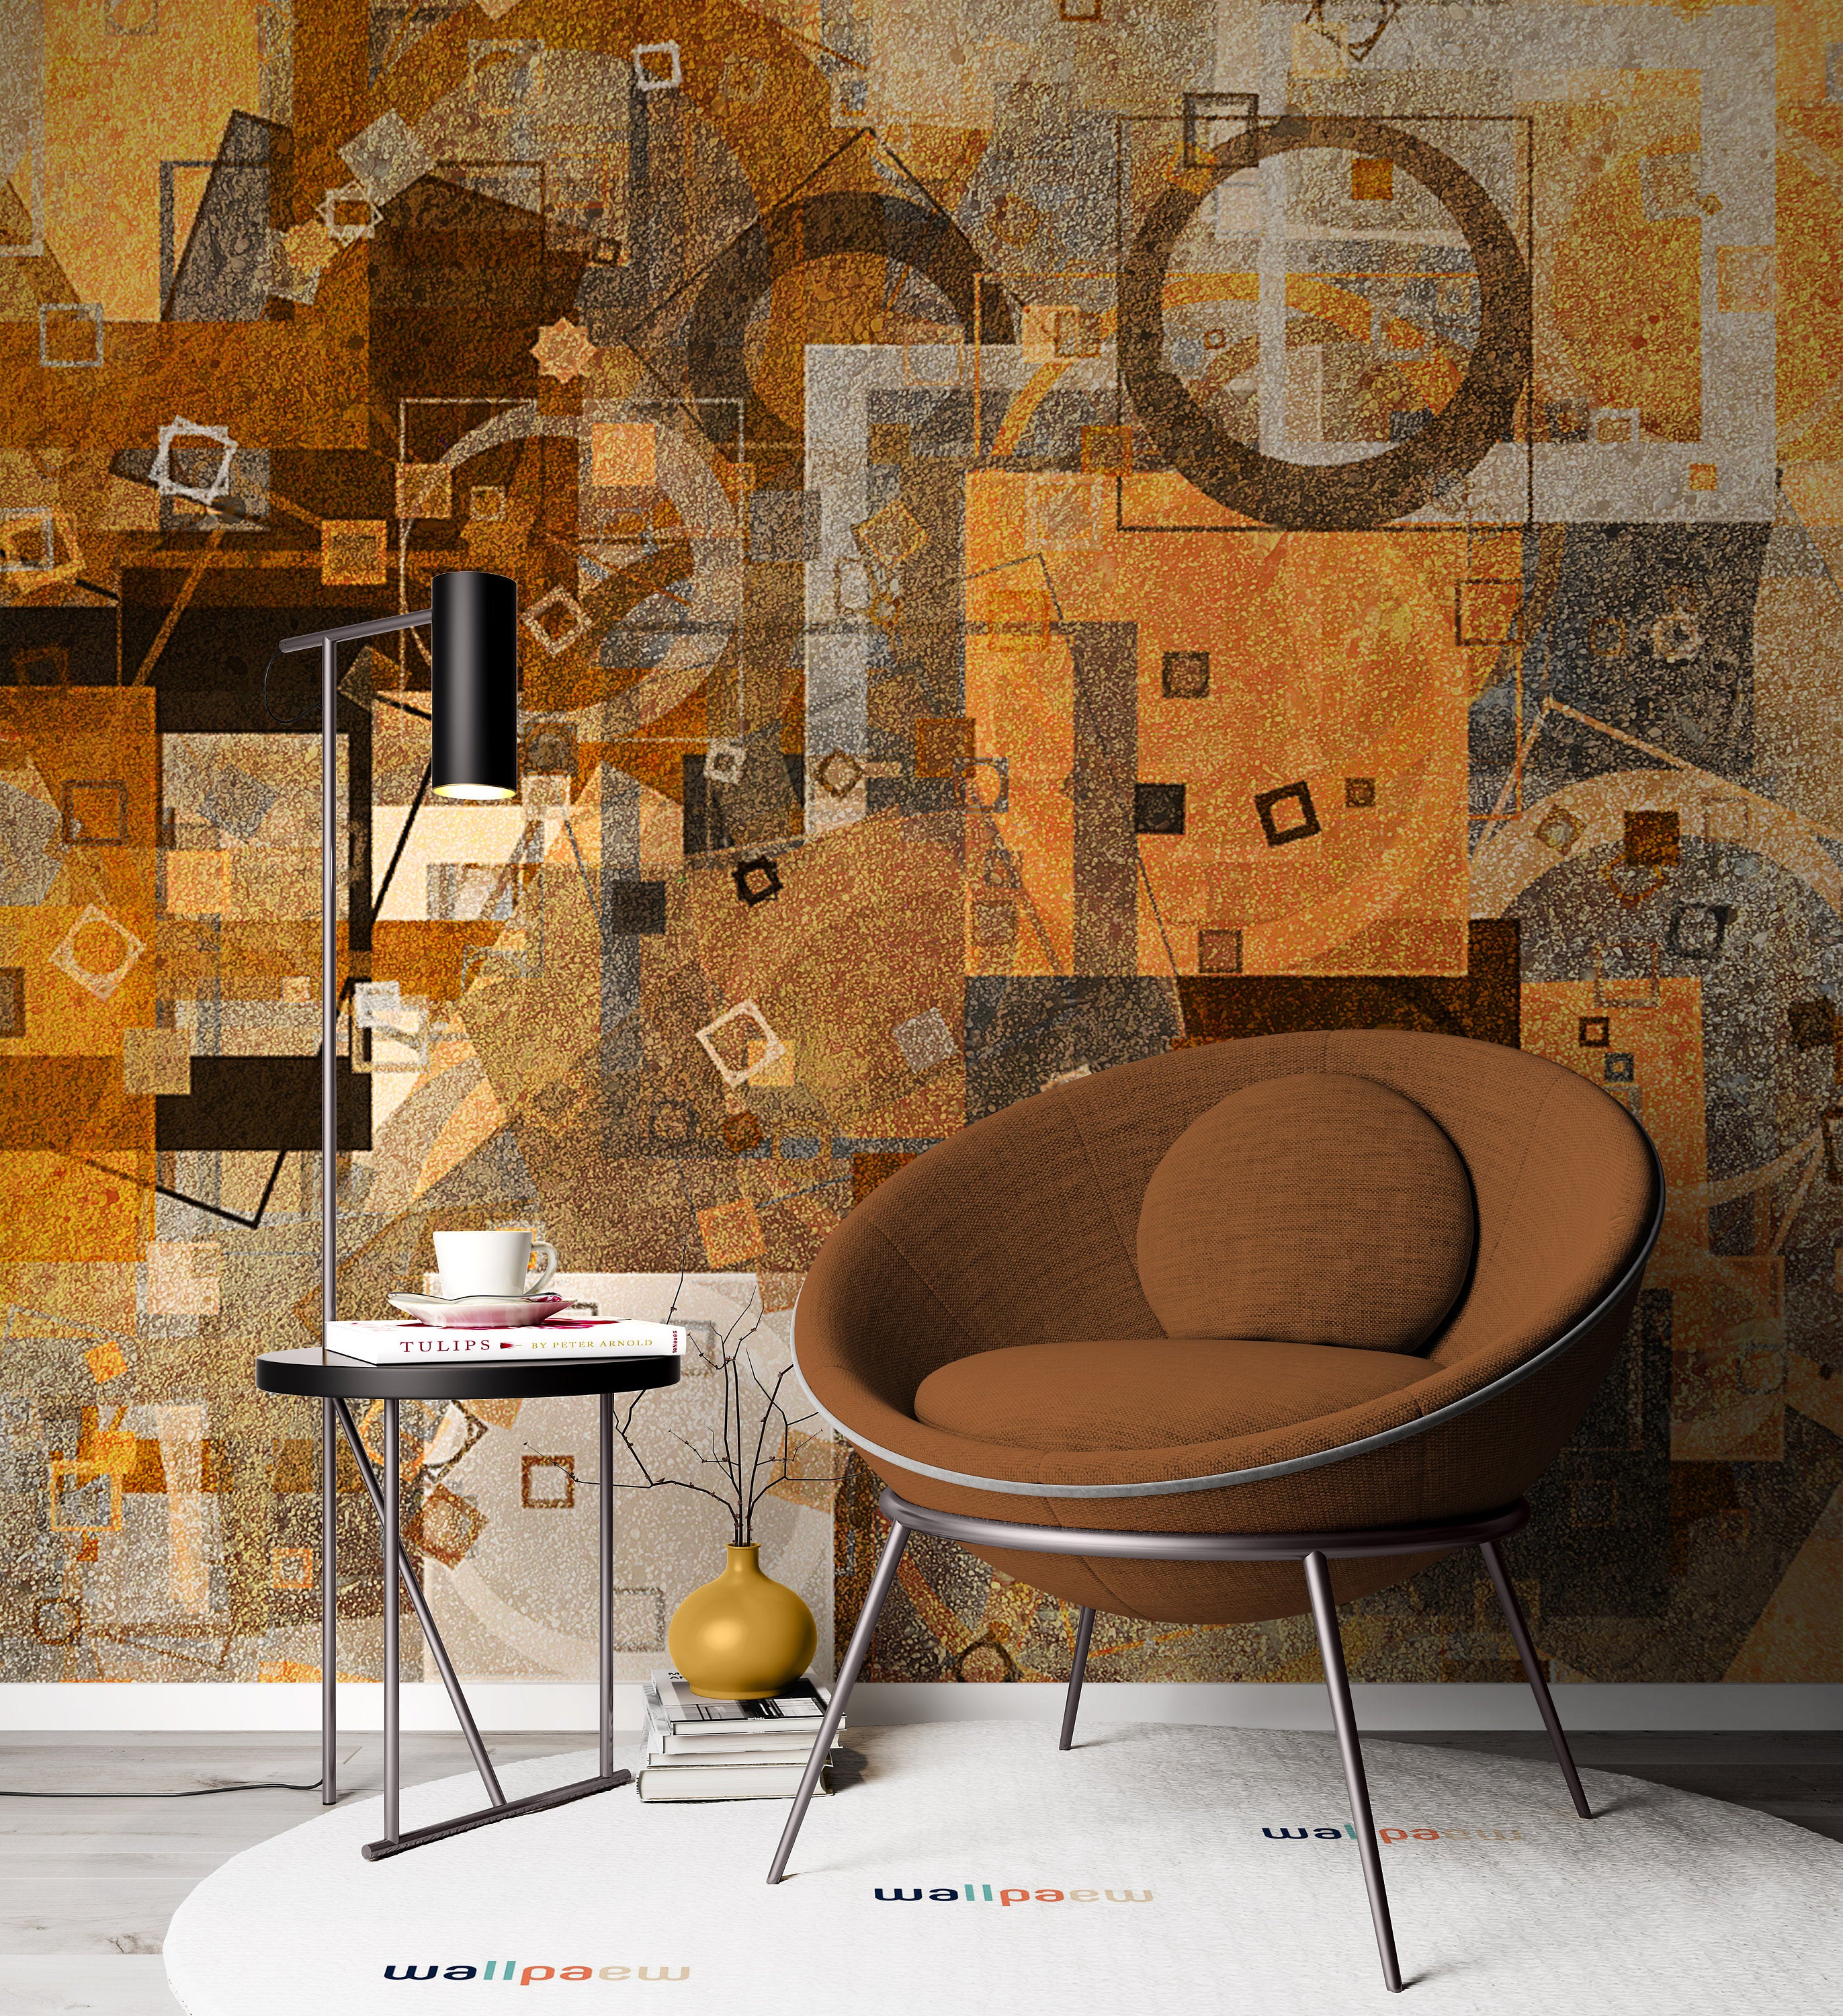 Abstract Grunge Rough Blended Texture Overlay Background Wallpaper Self Adhesive Peel and Stick Wall Sticker Wall Decoration Removable